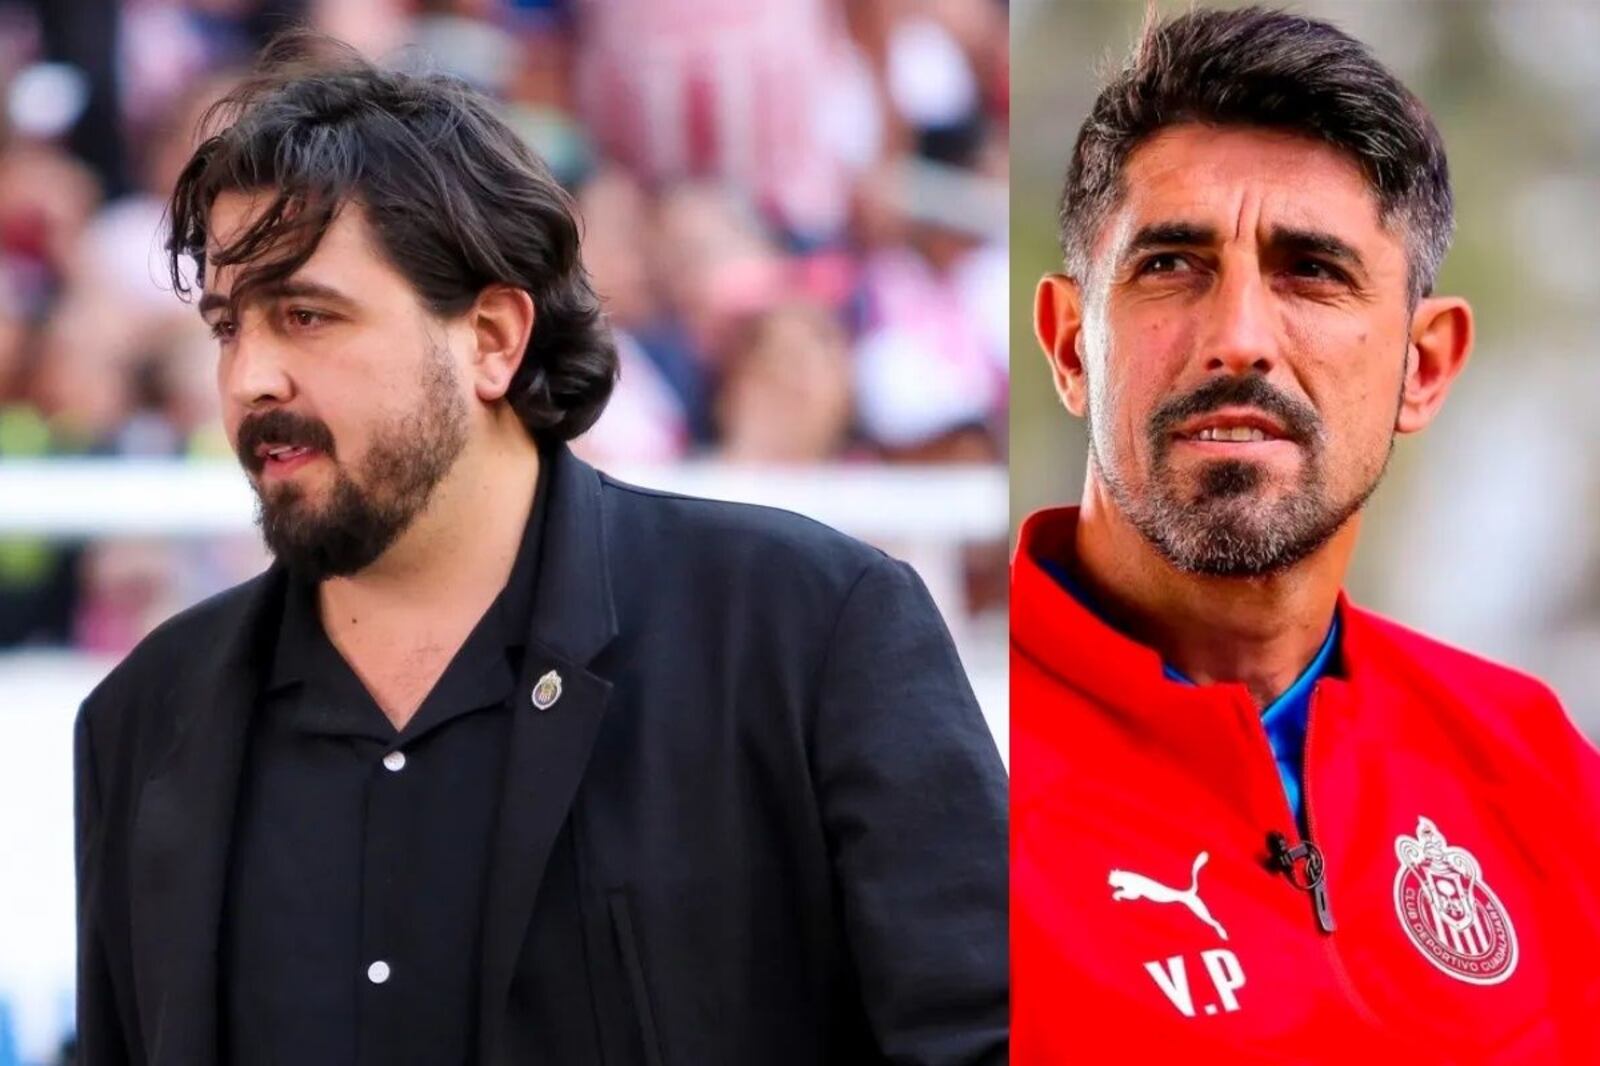 Vergara was at the club, the coach who would come to Chivas if Paunovic loses